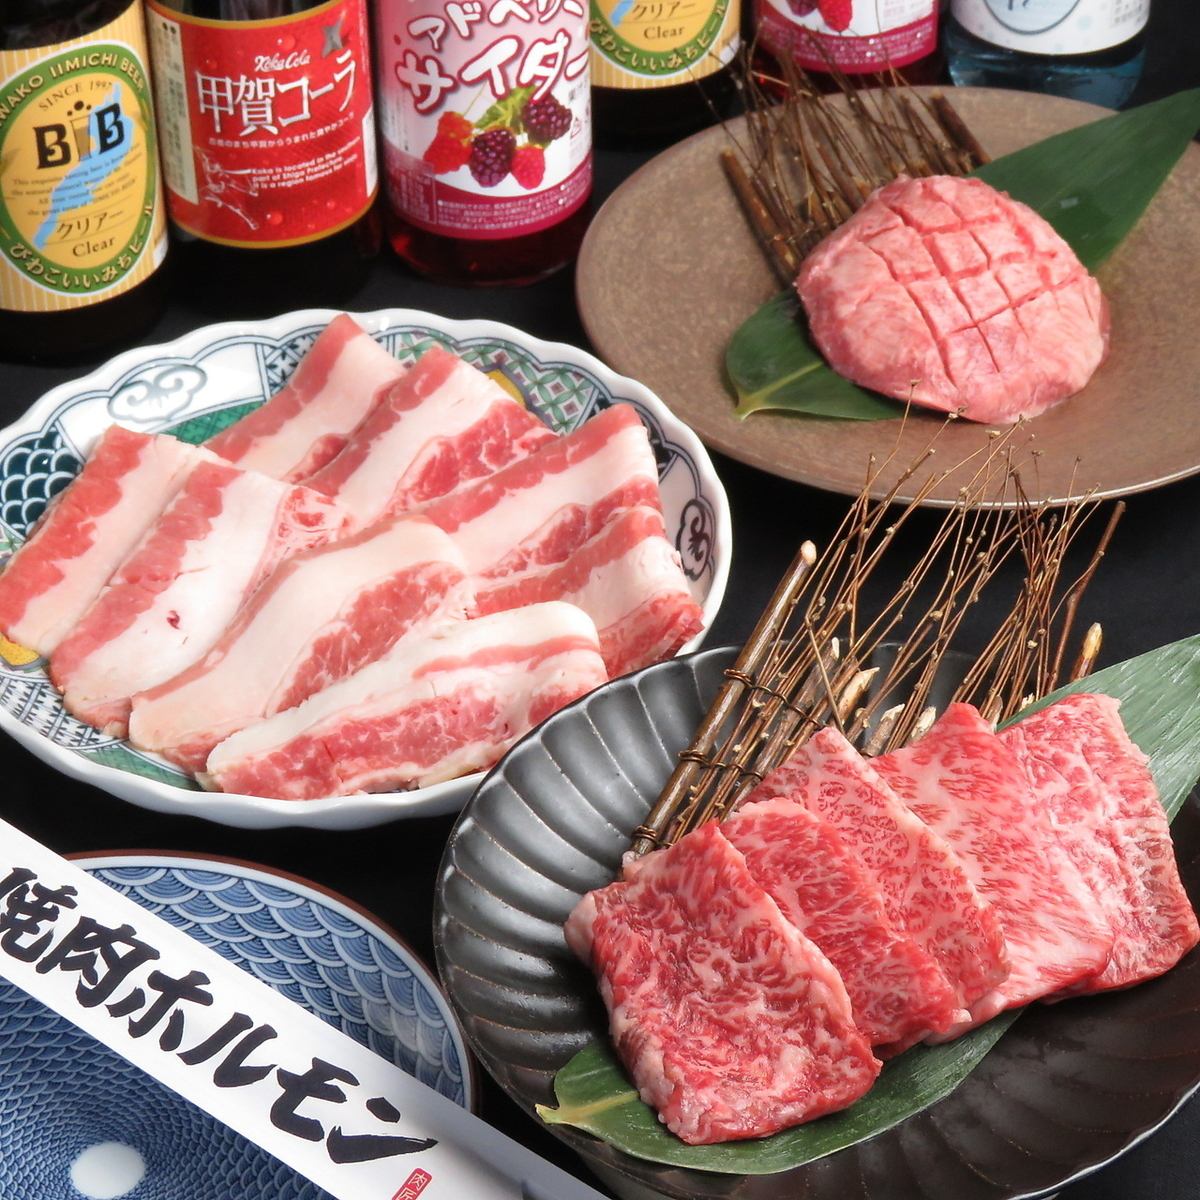 We have a track record of wholesale Omi beef to yakiniku and butcher shops all over Japan!